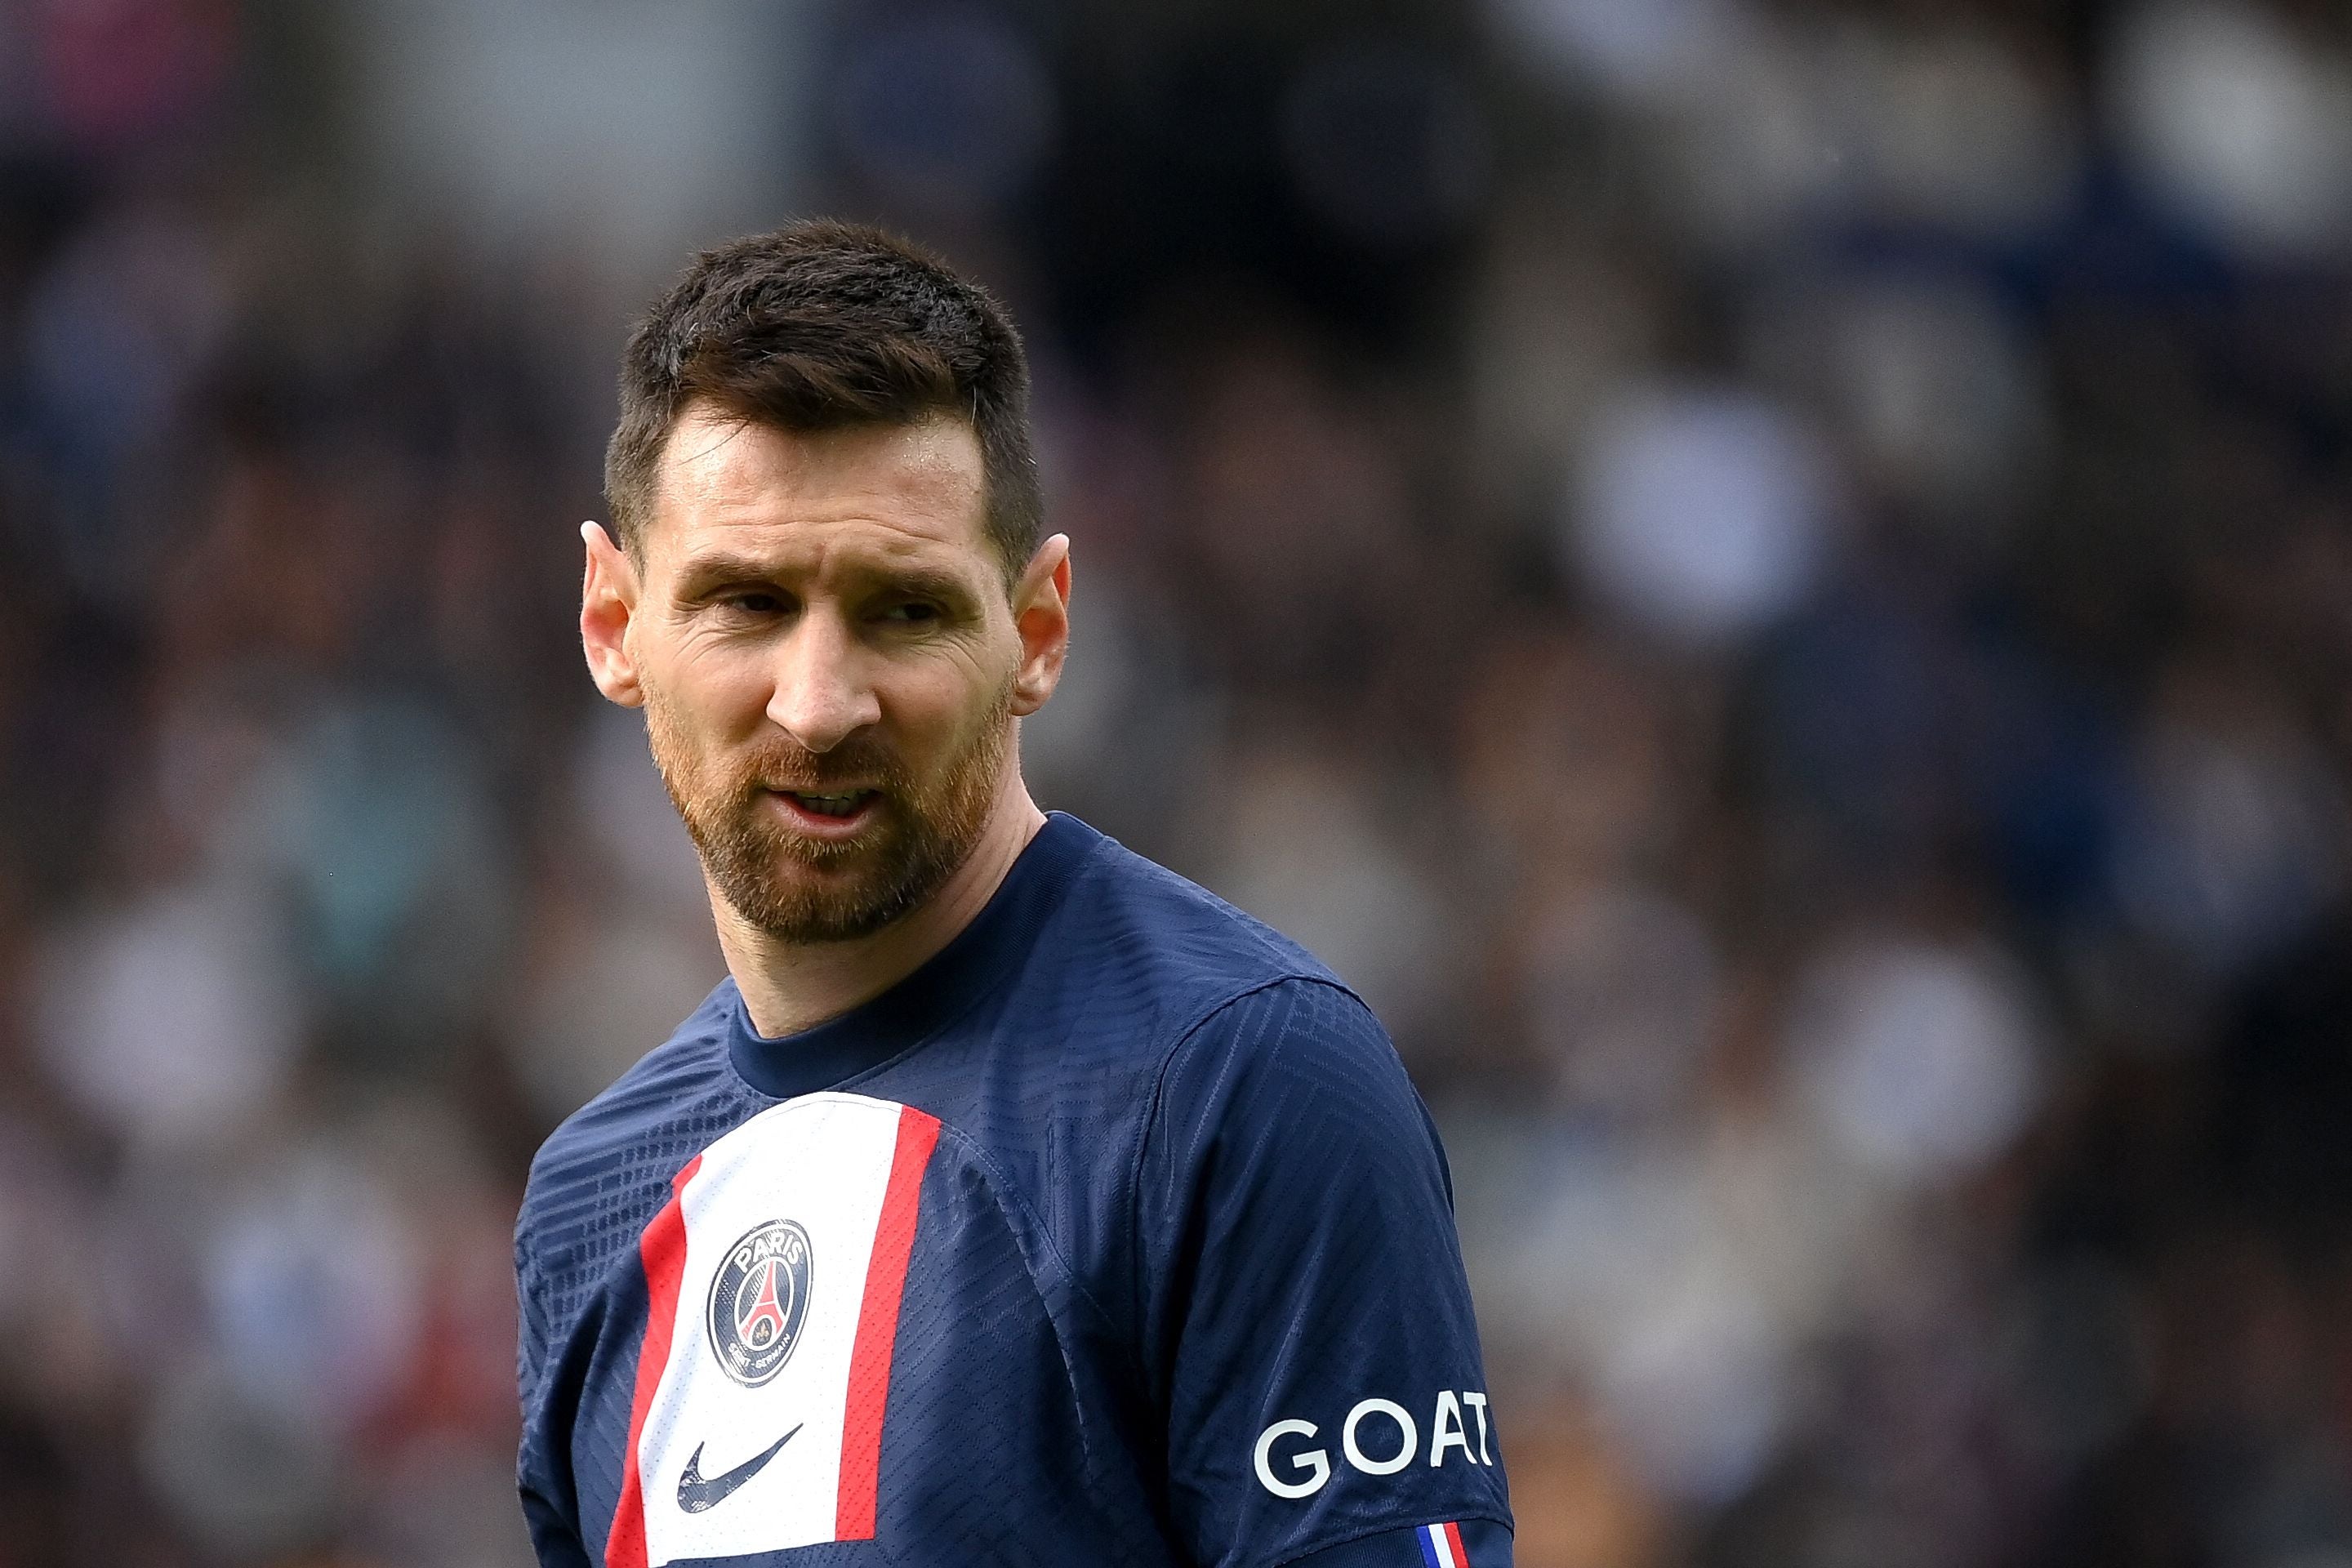 PSG suspends Messi for unapproved trip to Saudi Arabia